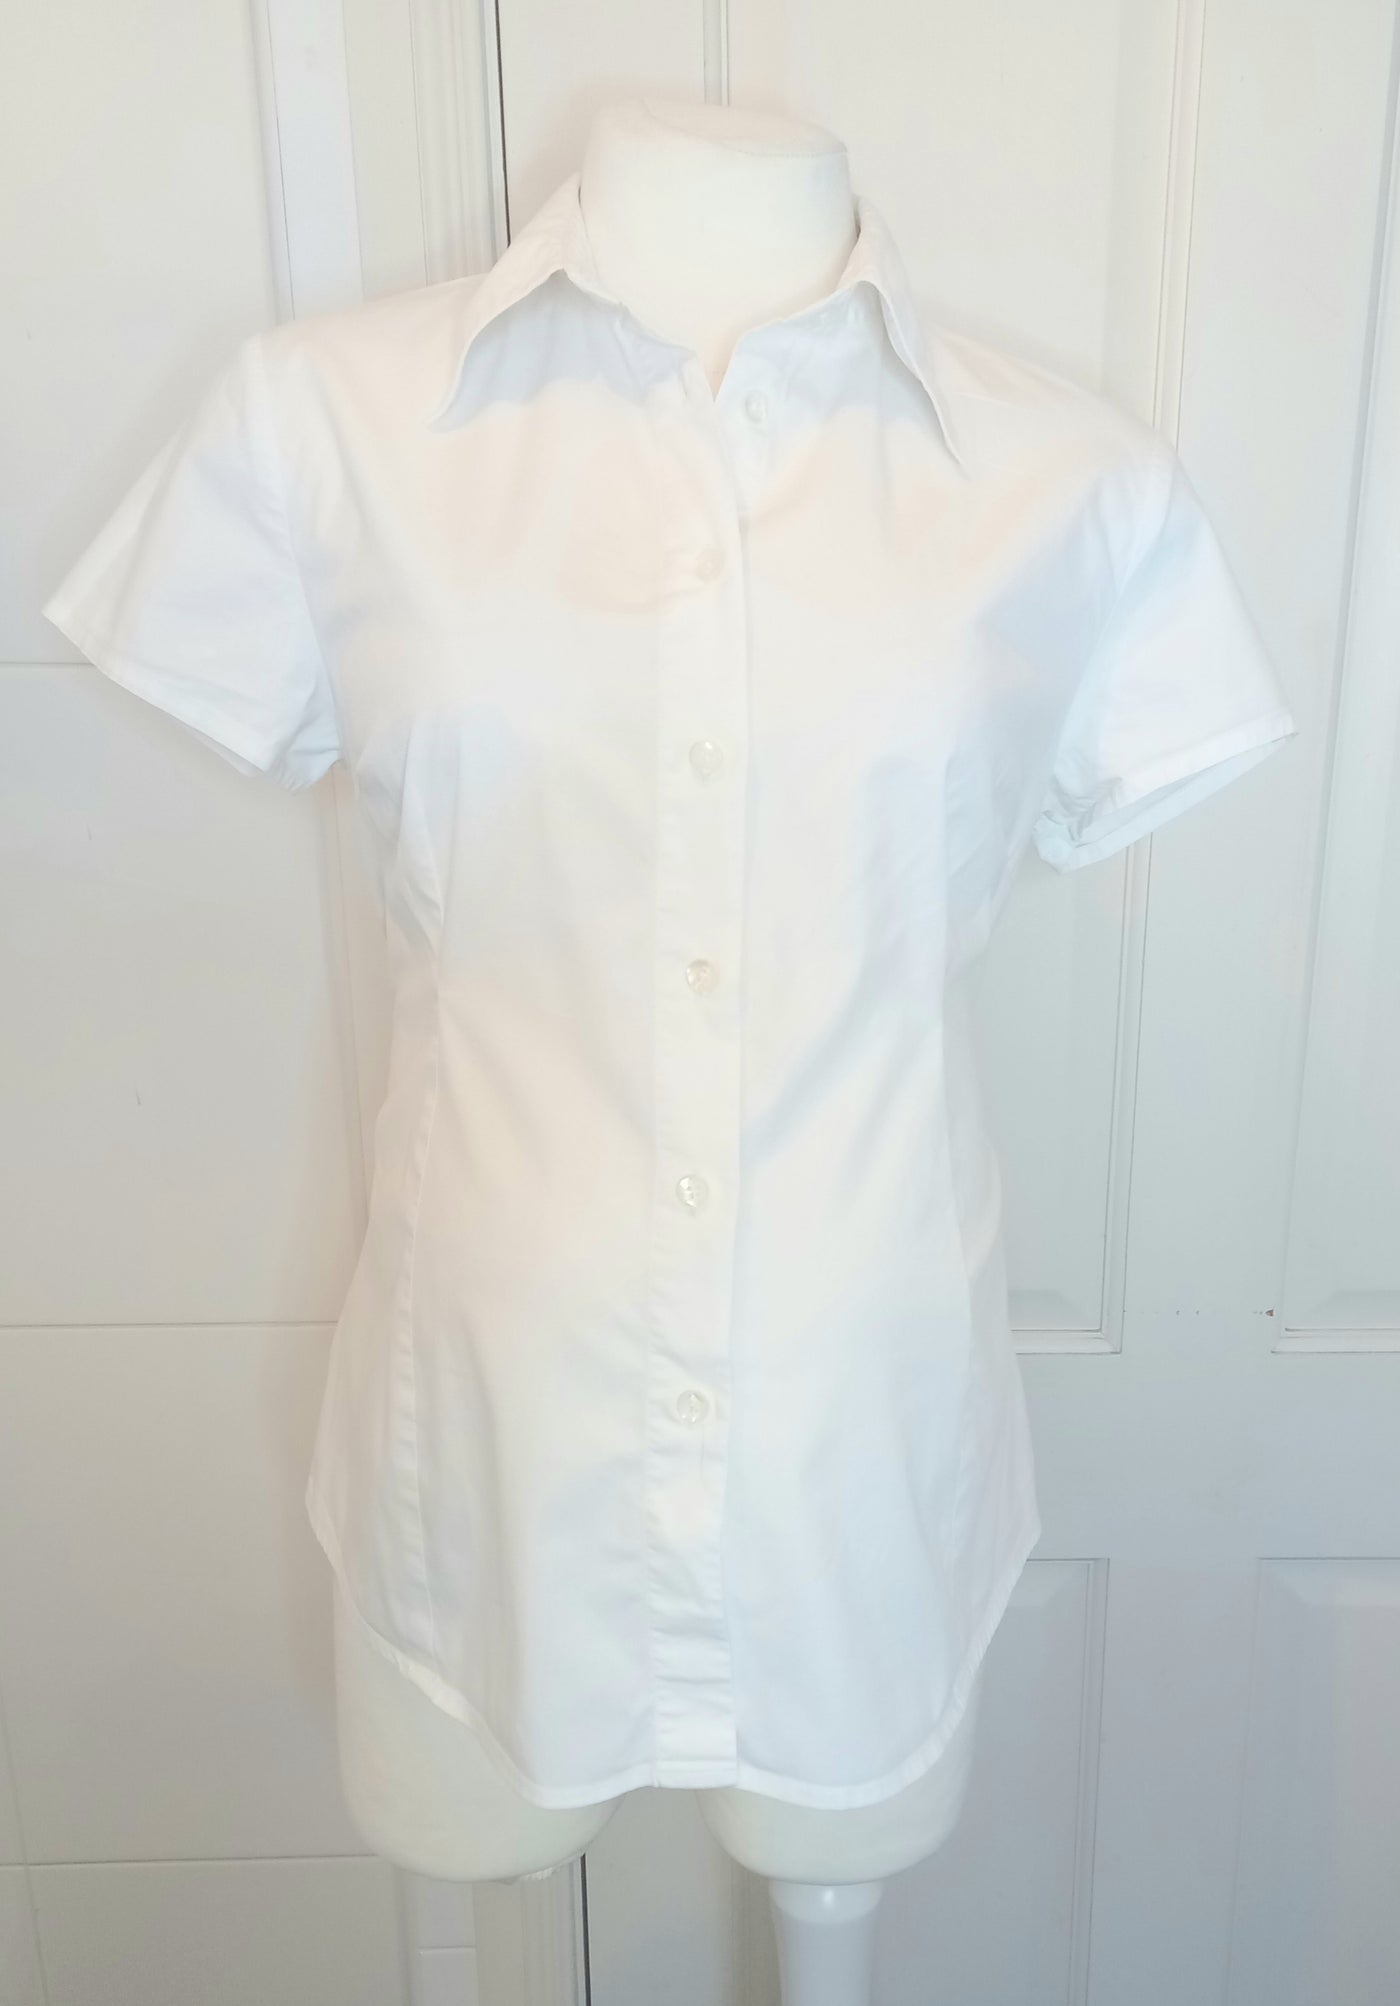 H&M Mama White Short Sleeved Shirt - Size M (Approx UK 10/12)